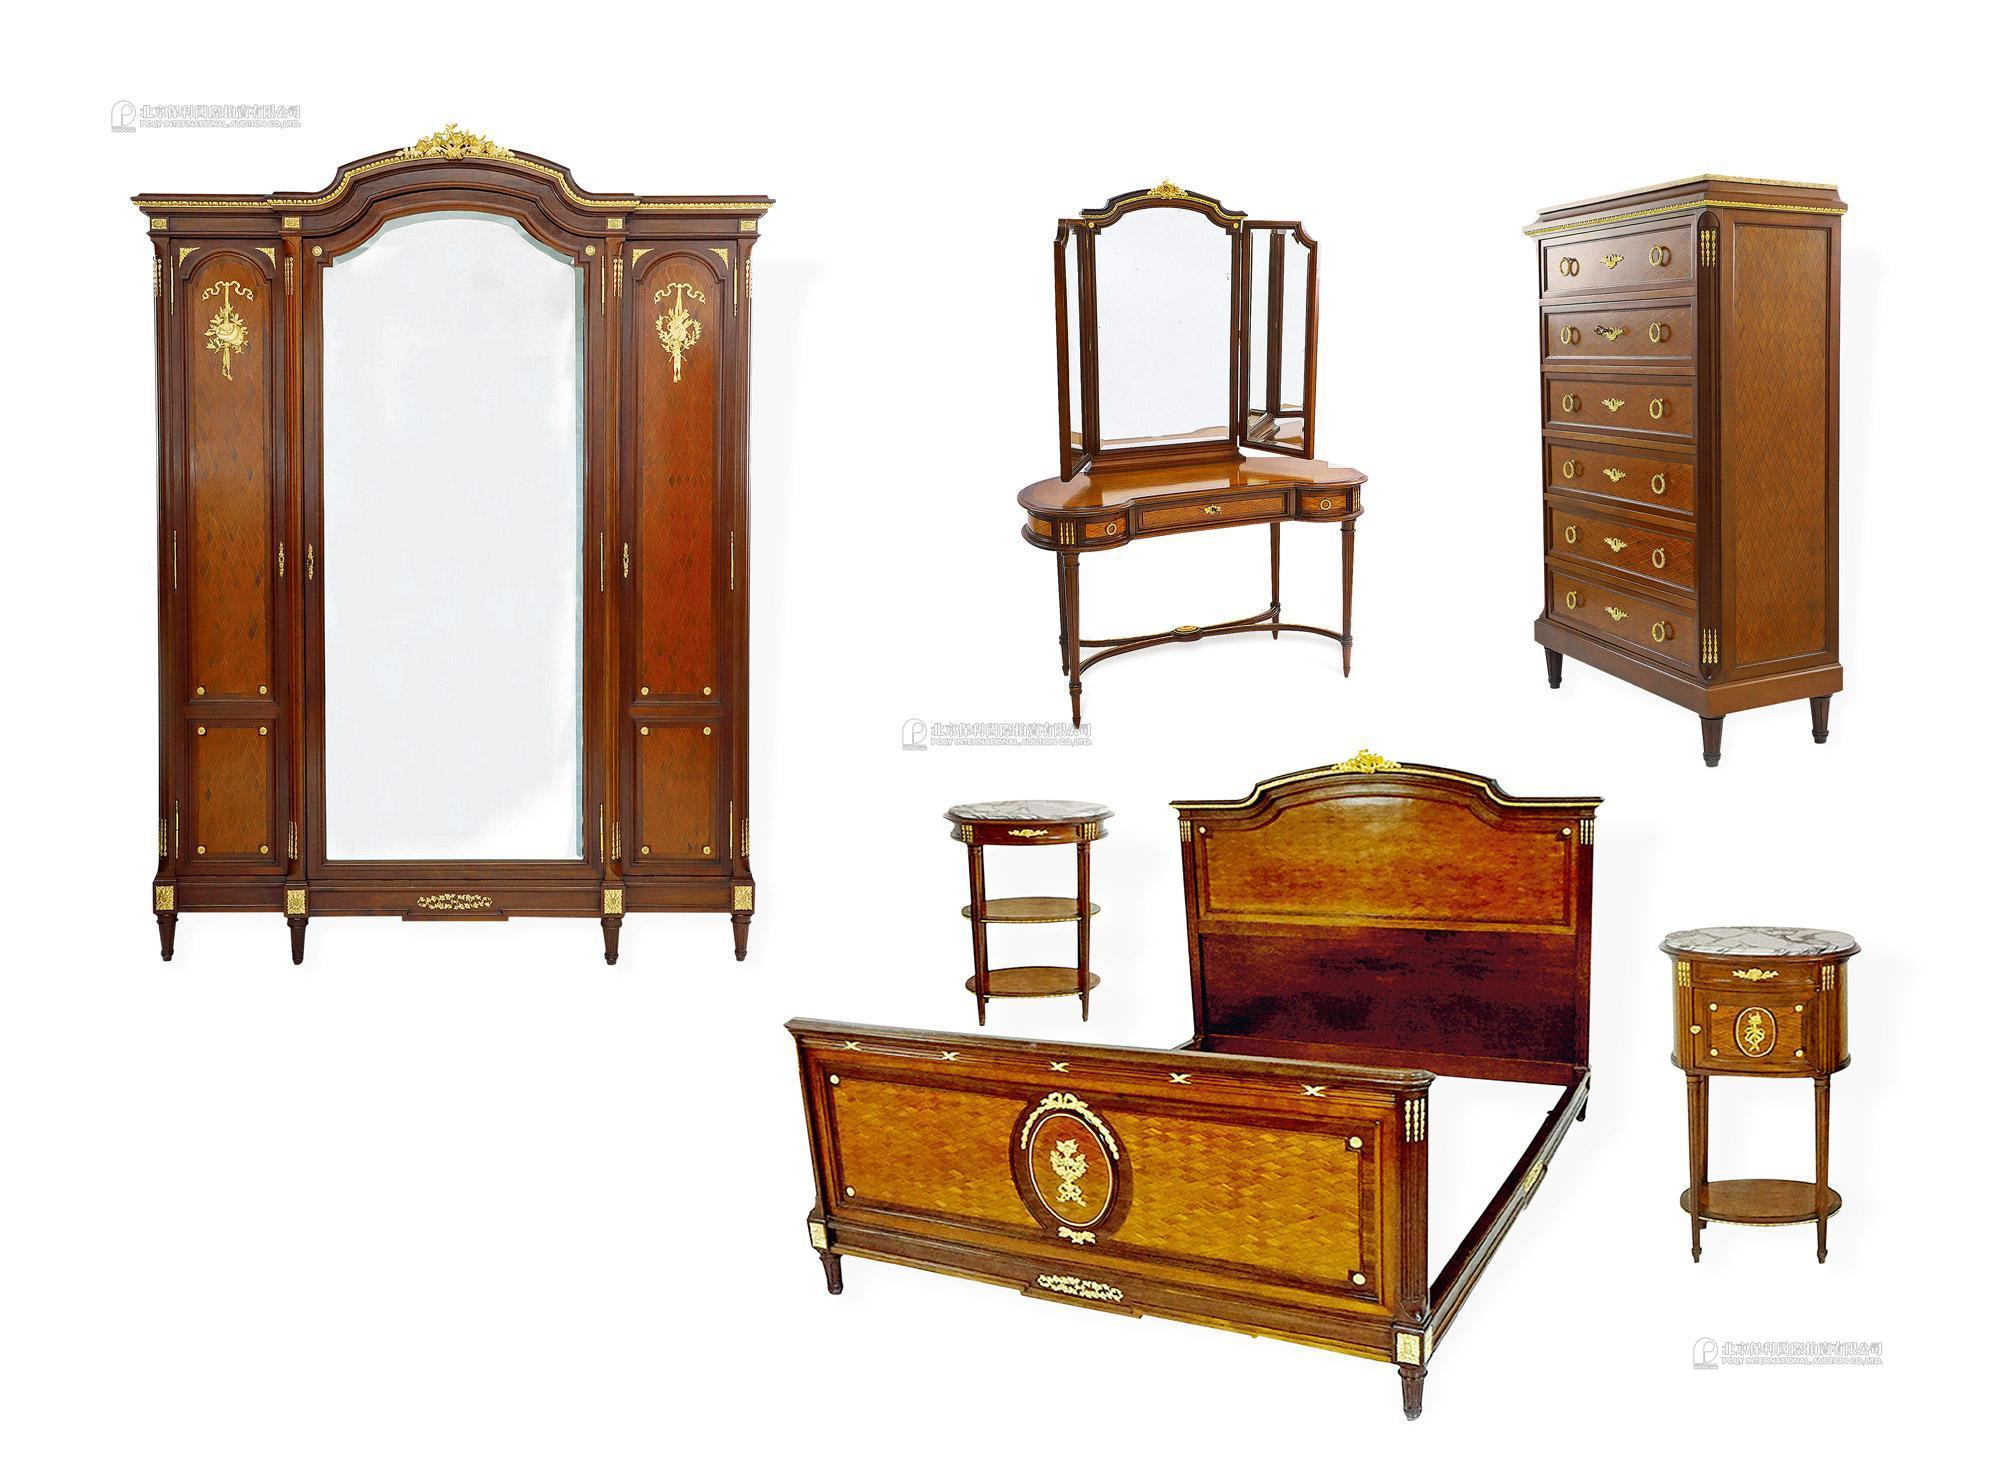 MERCIER PARIS A FRENCH GILT MOUNTED MARQUETRY BEDROOM SUITE